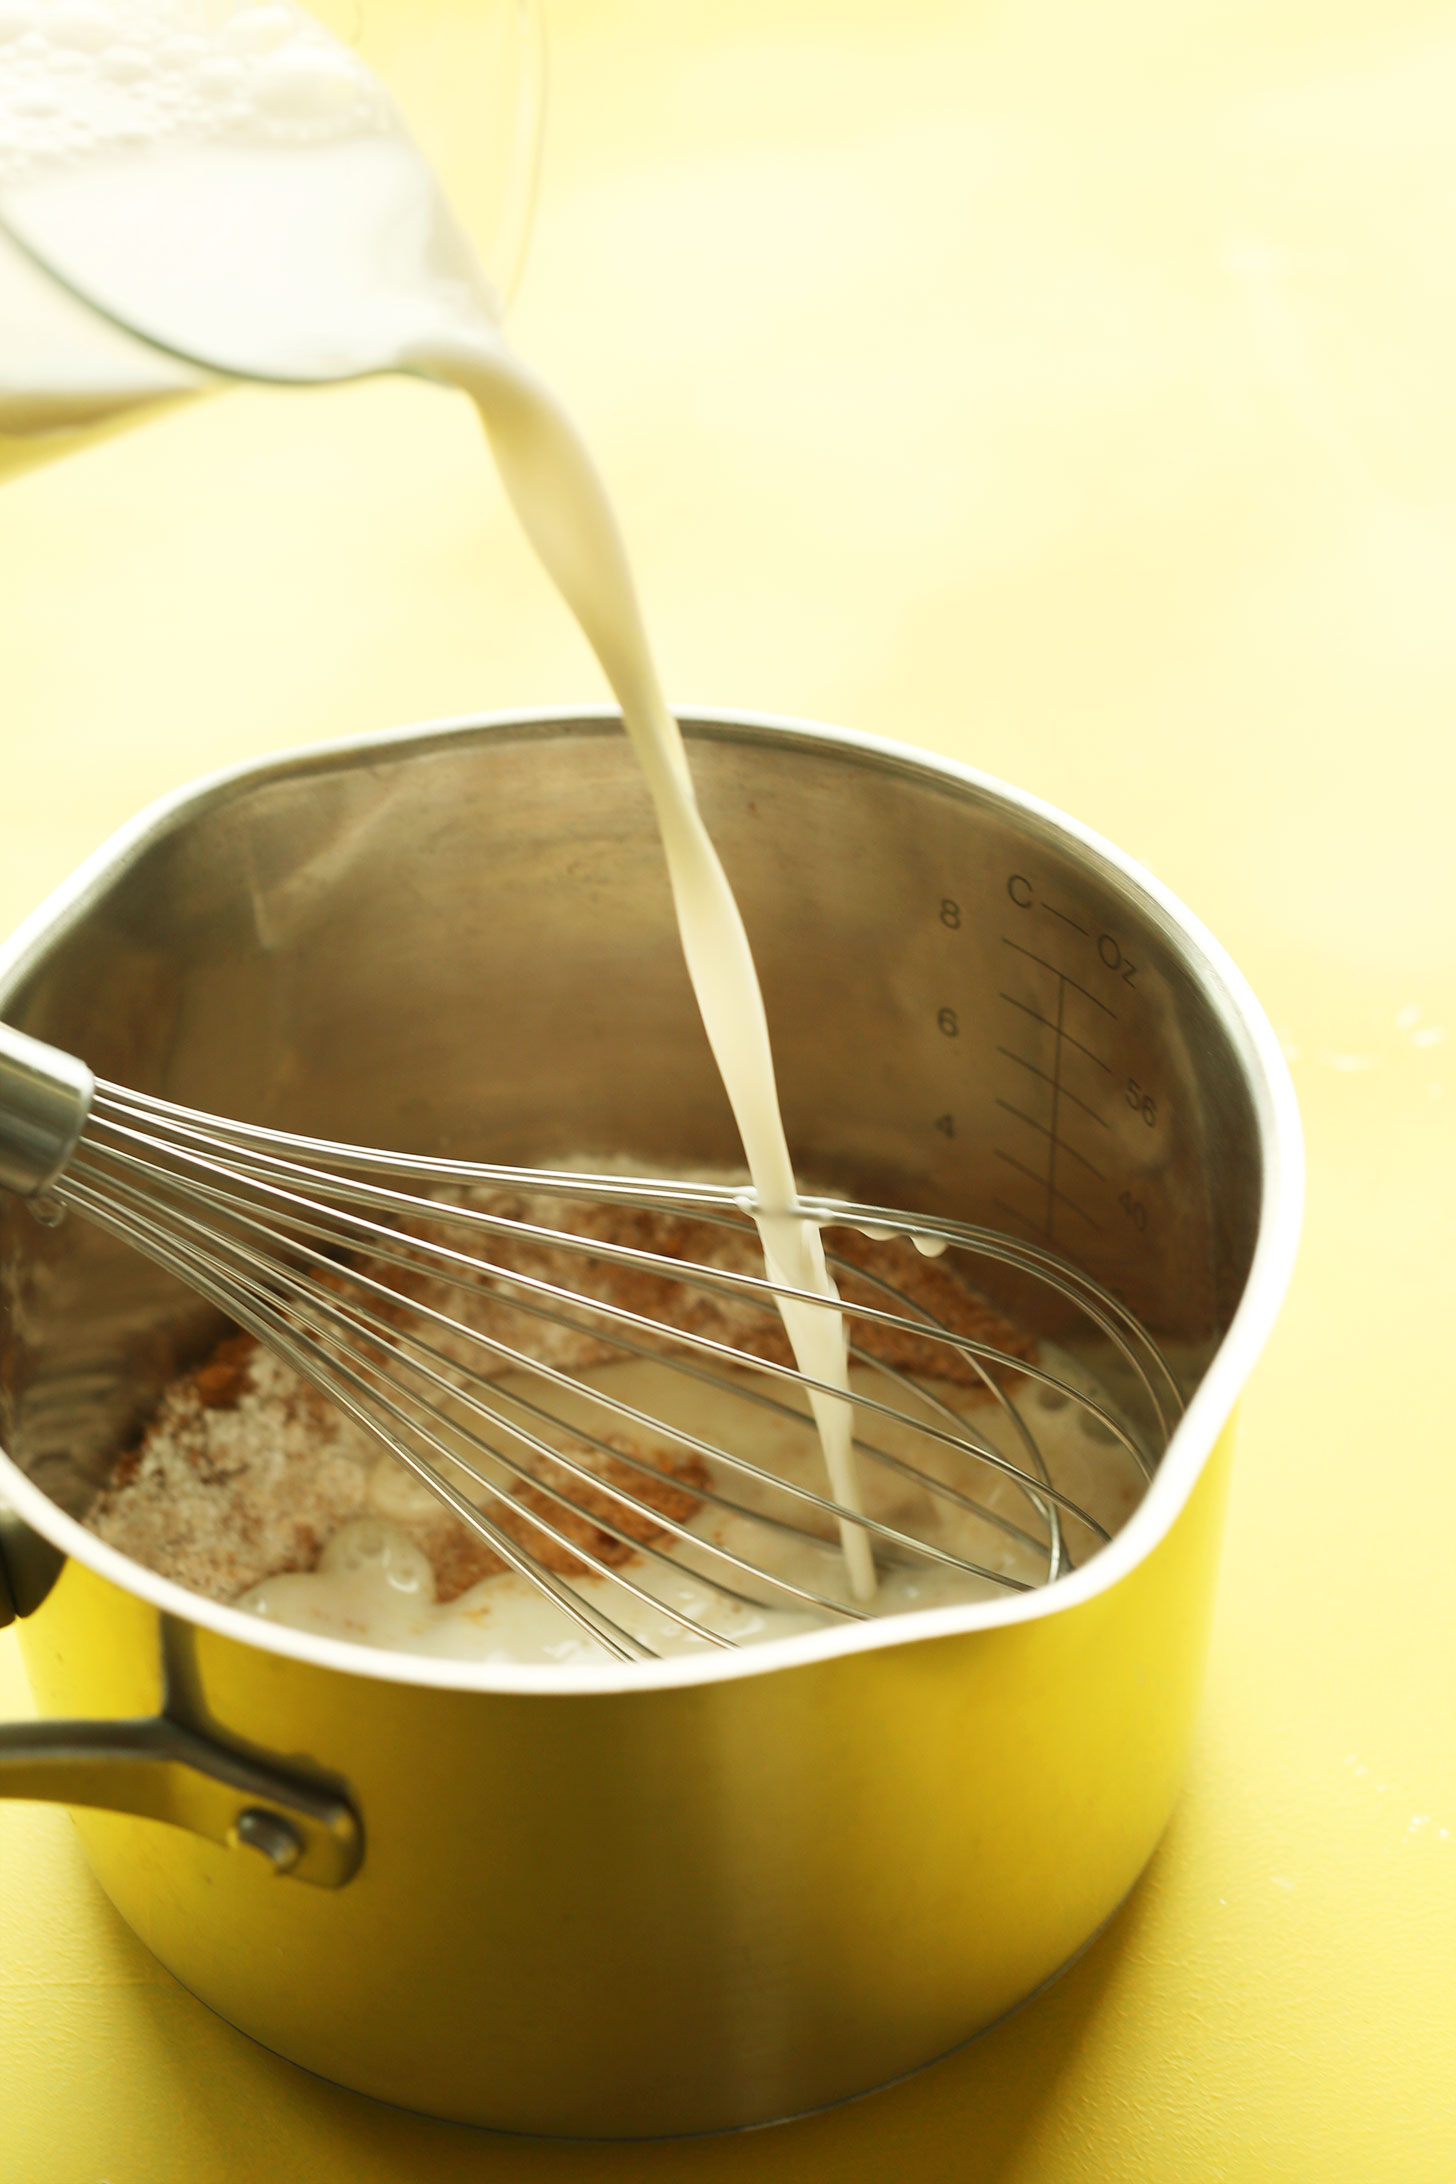 Pouring nut-milk into a saucepan full of spices for making homemade Banana Cream Pie